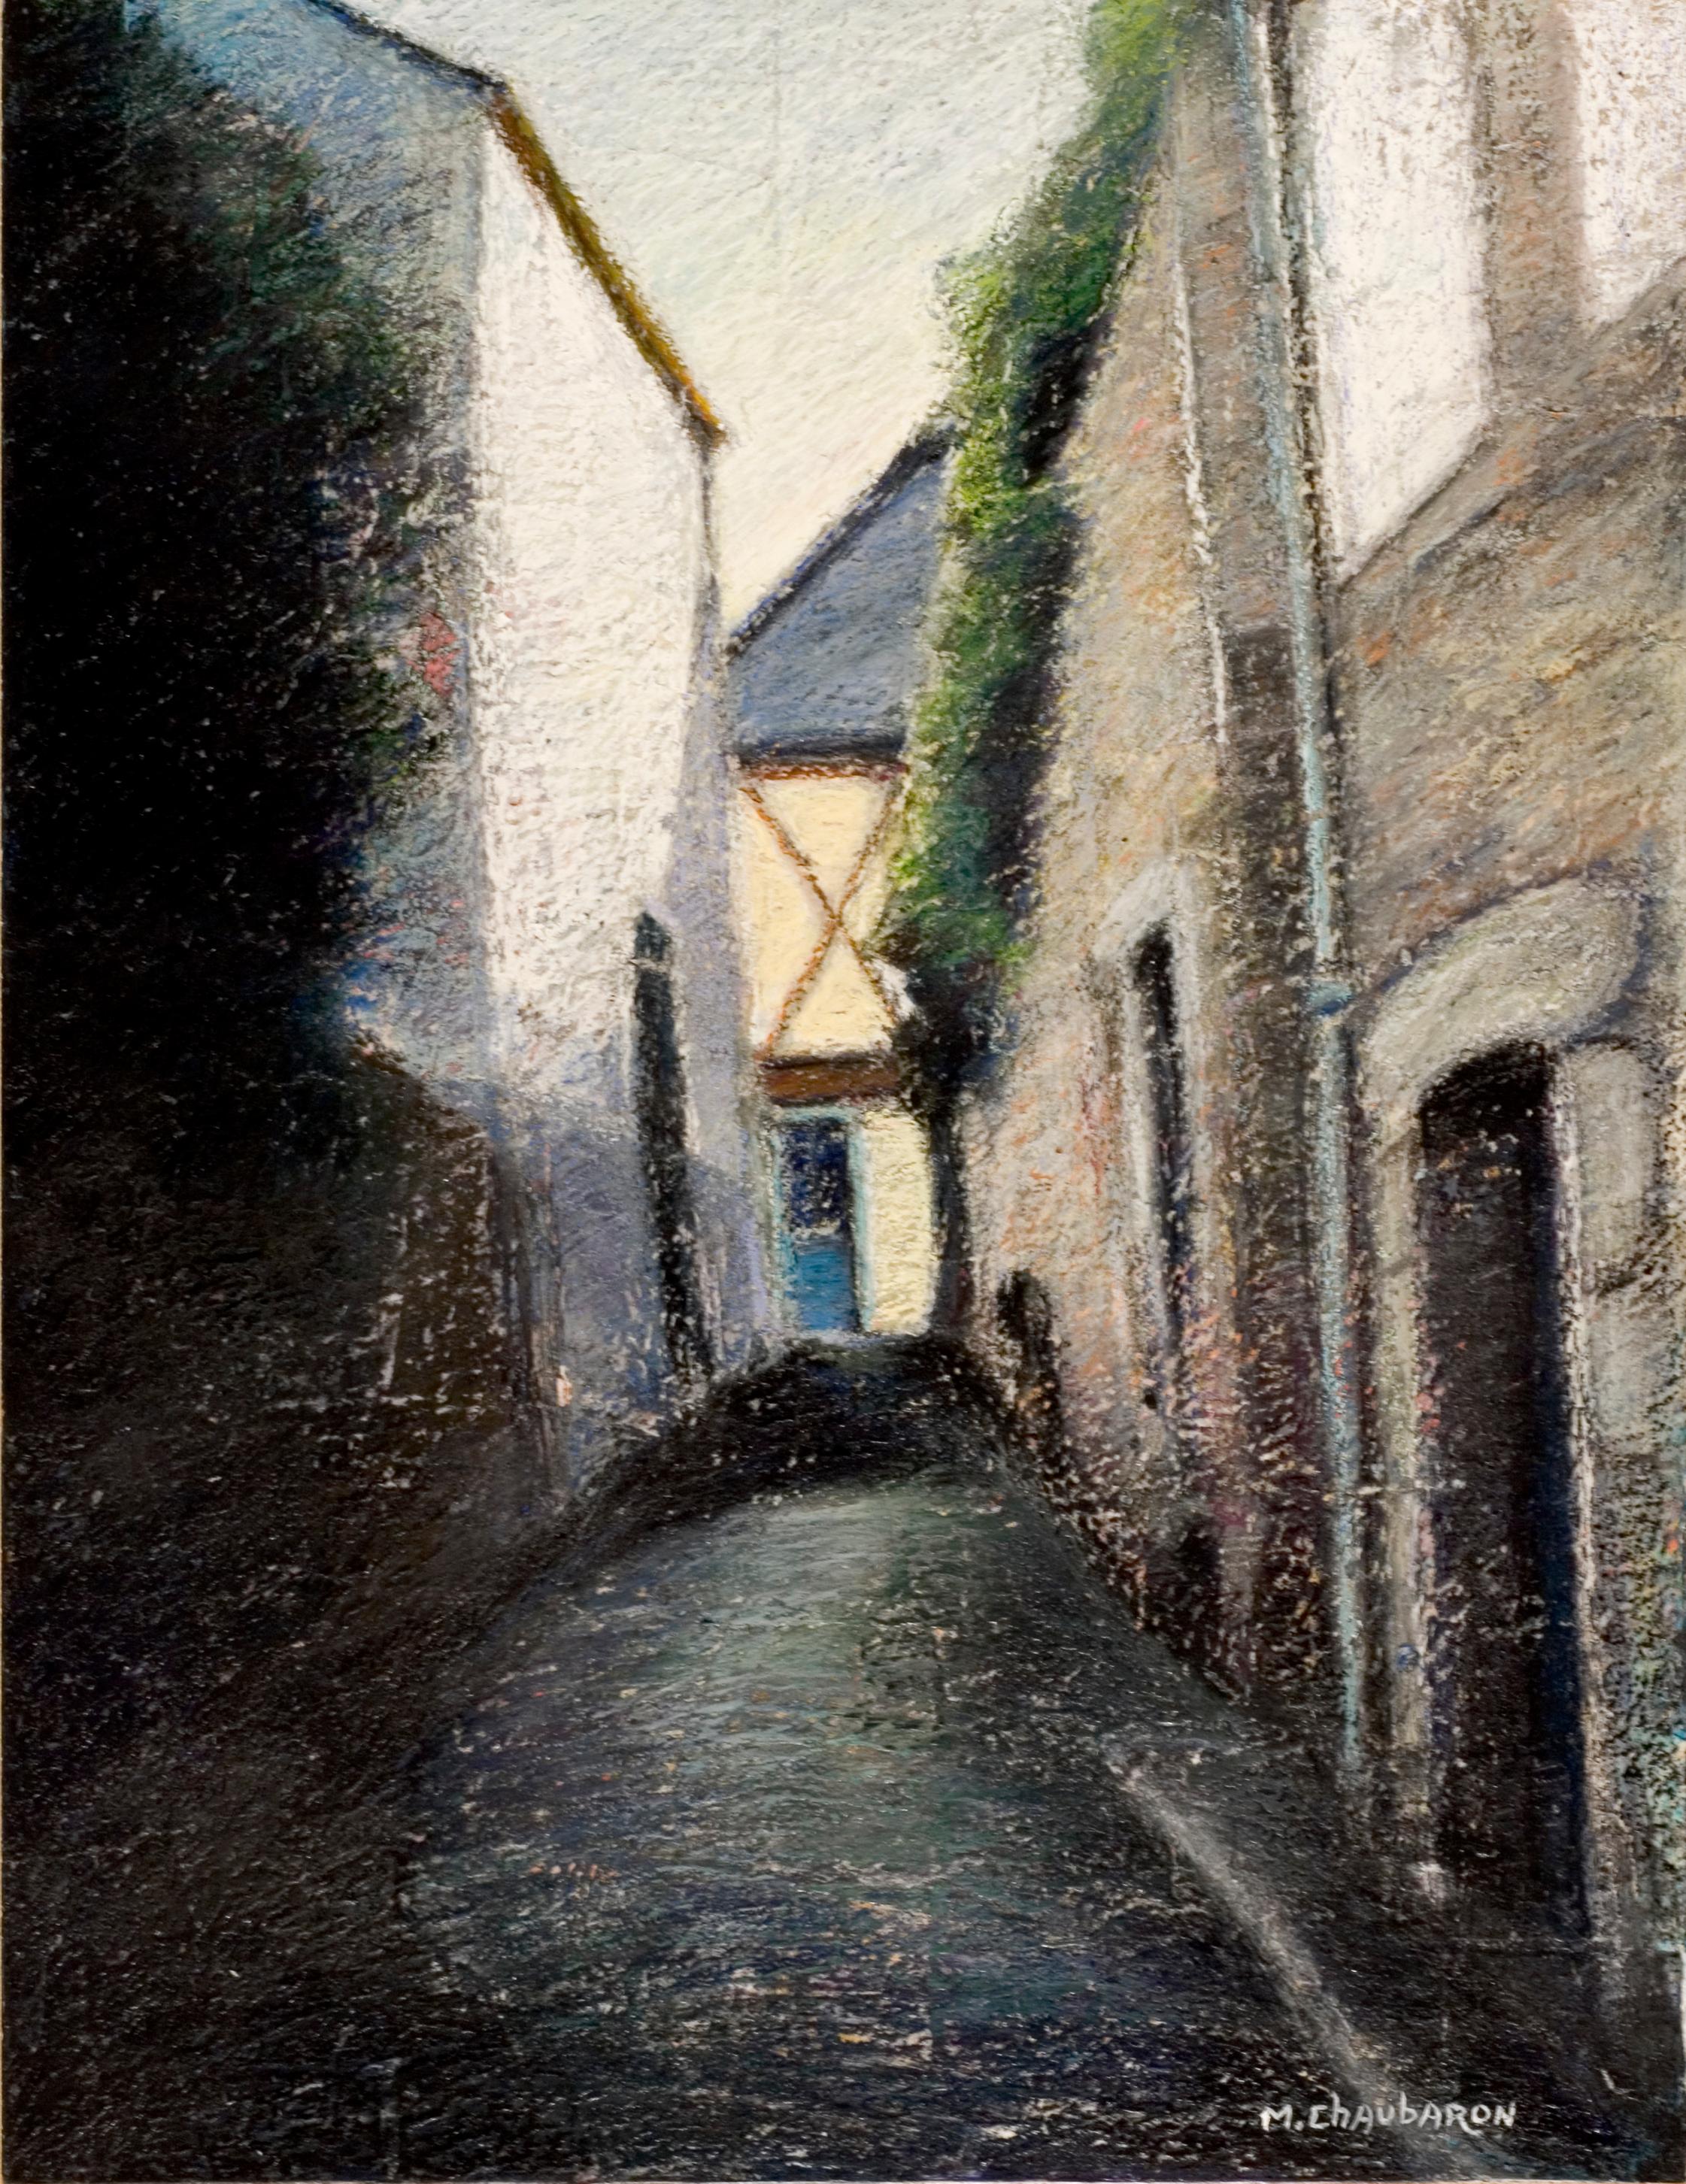 Marc Chaubaron Landscape Painting - Small Uphill Shaded Alley Leading to a Sunlit Half-Timbered House Oil Pastel